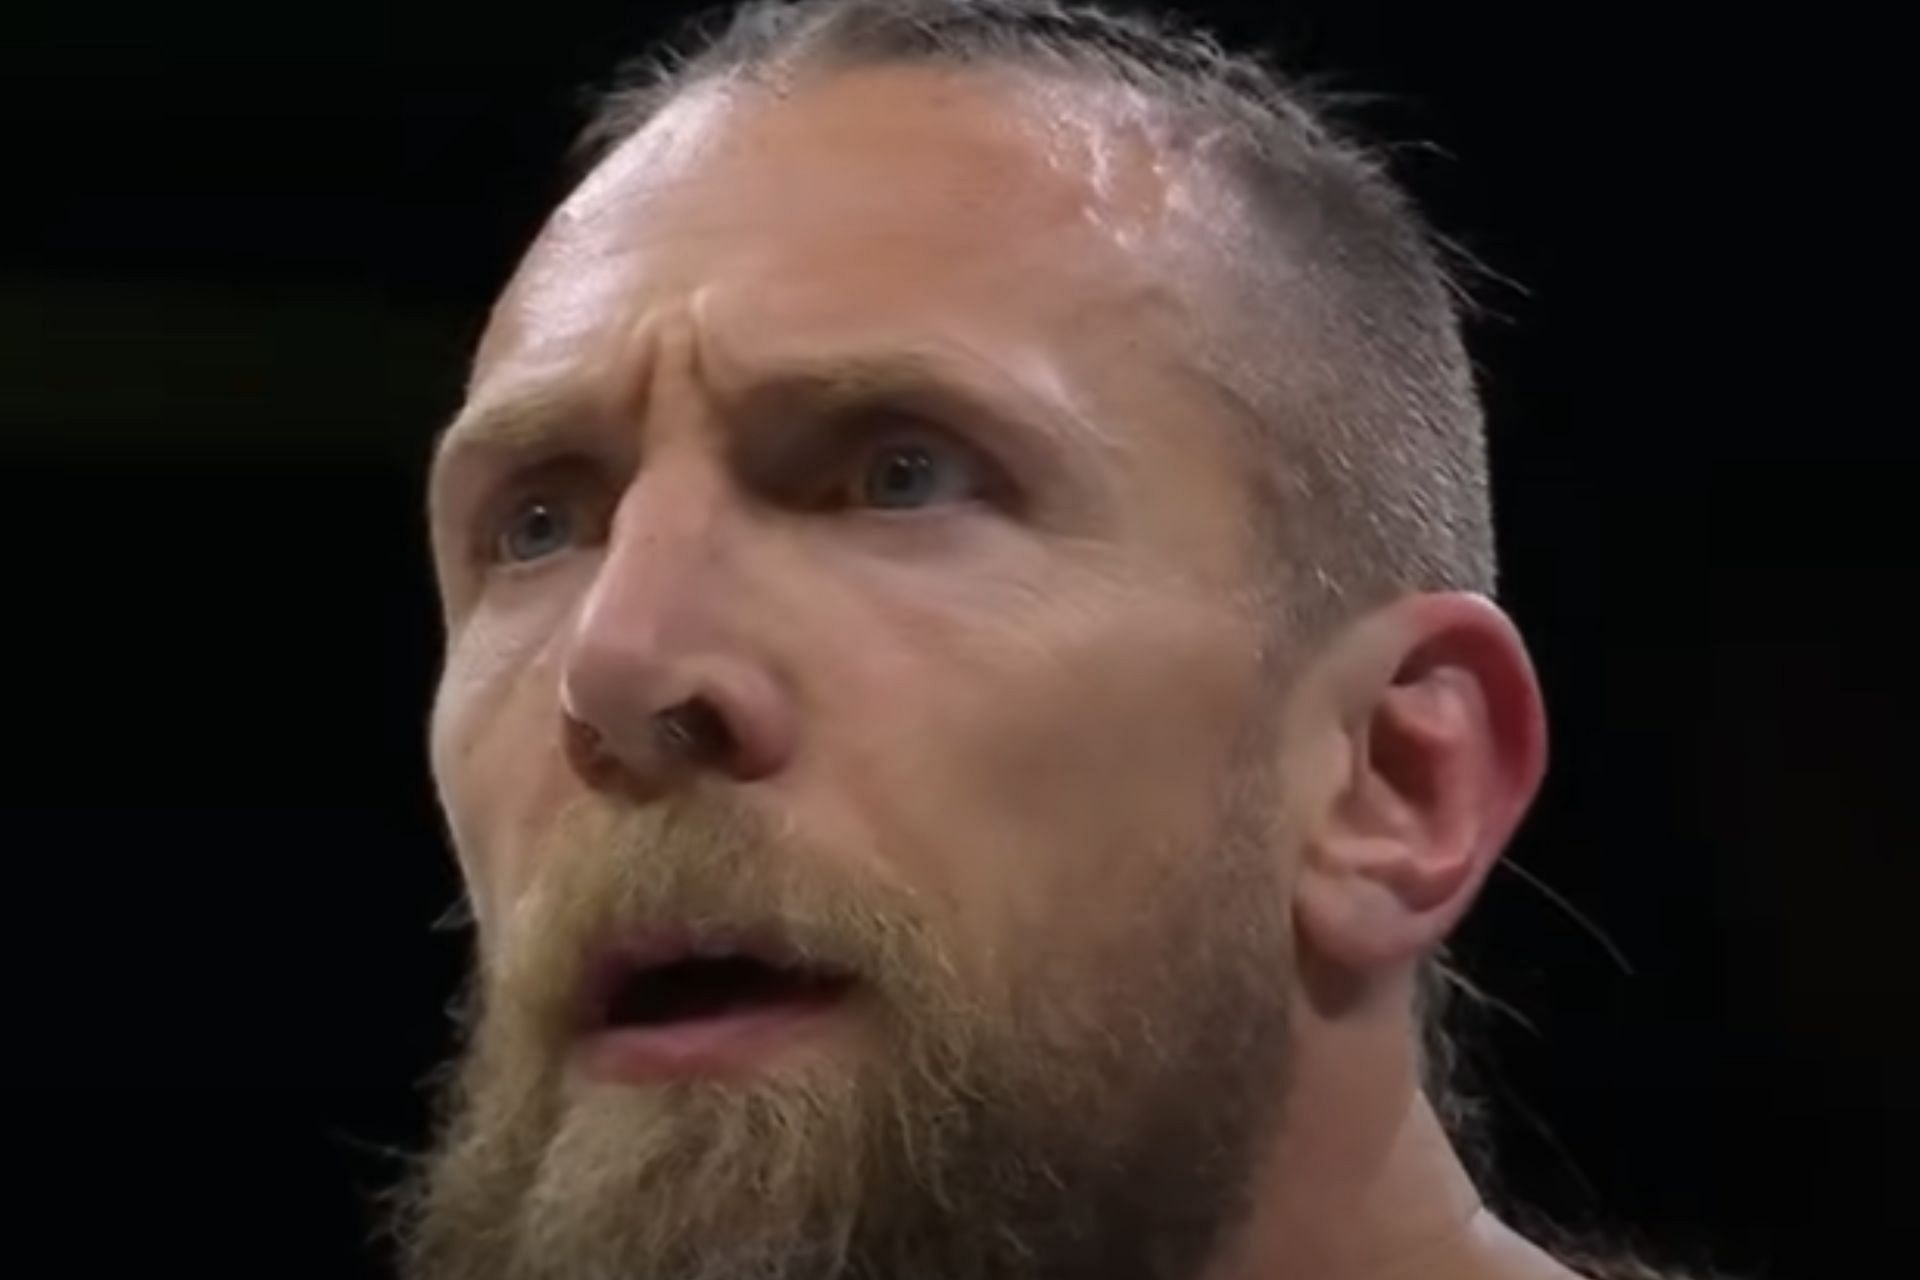 Bryan Danielson airs his frustrations, and its bad news for his opponent at Forbidden Door [Image Source: AEW YouTube]